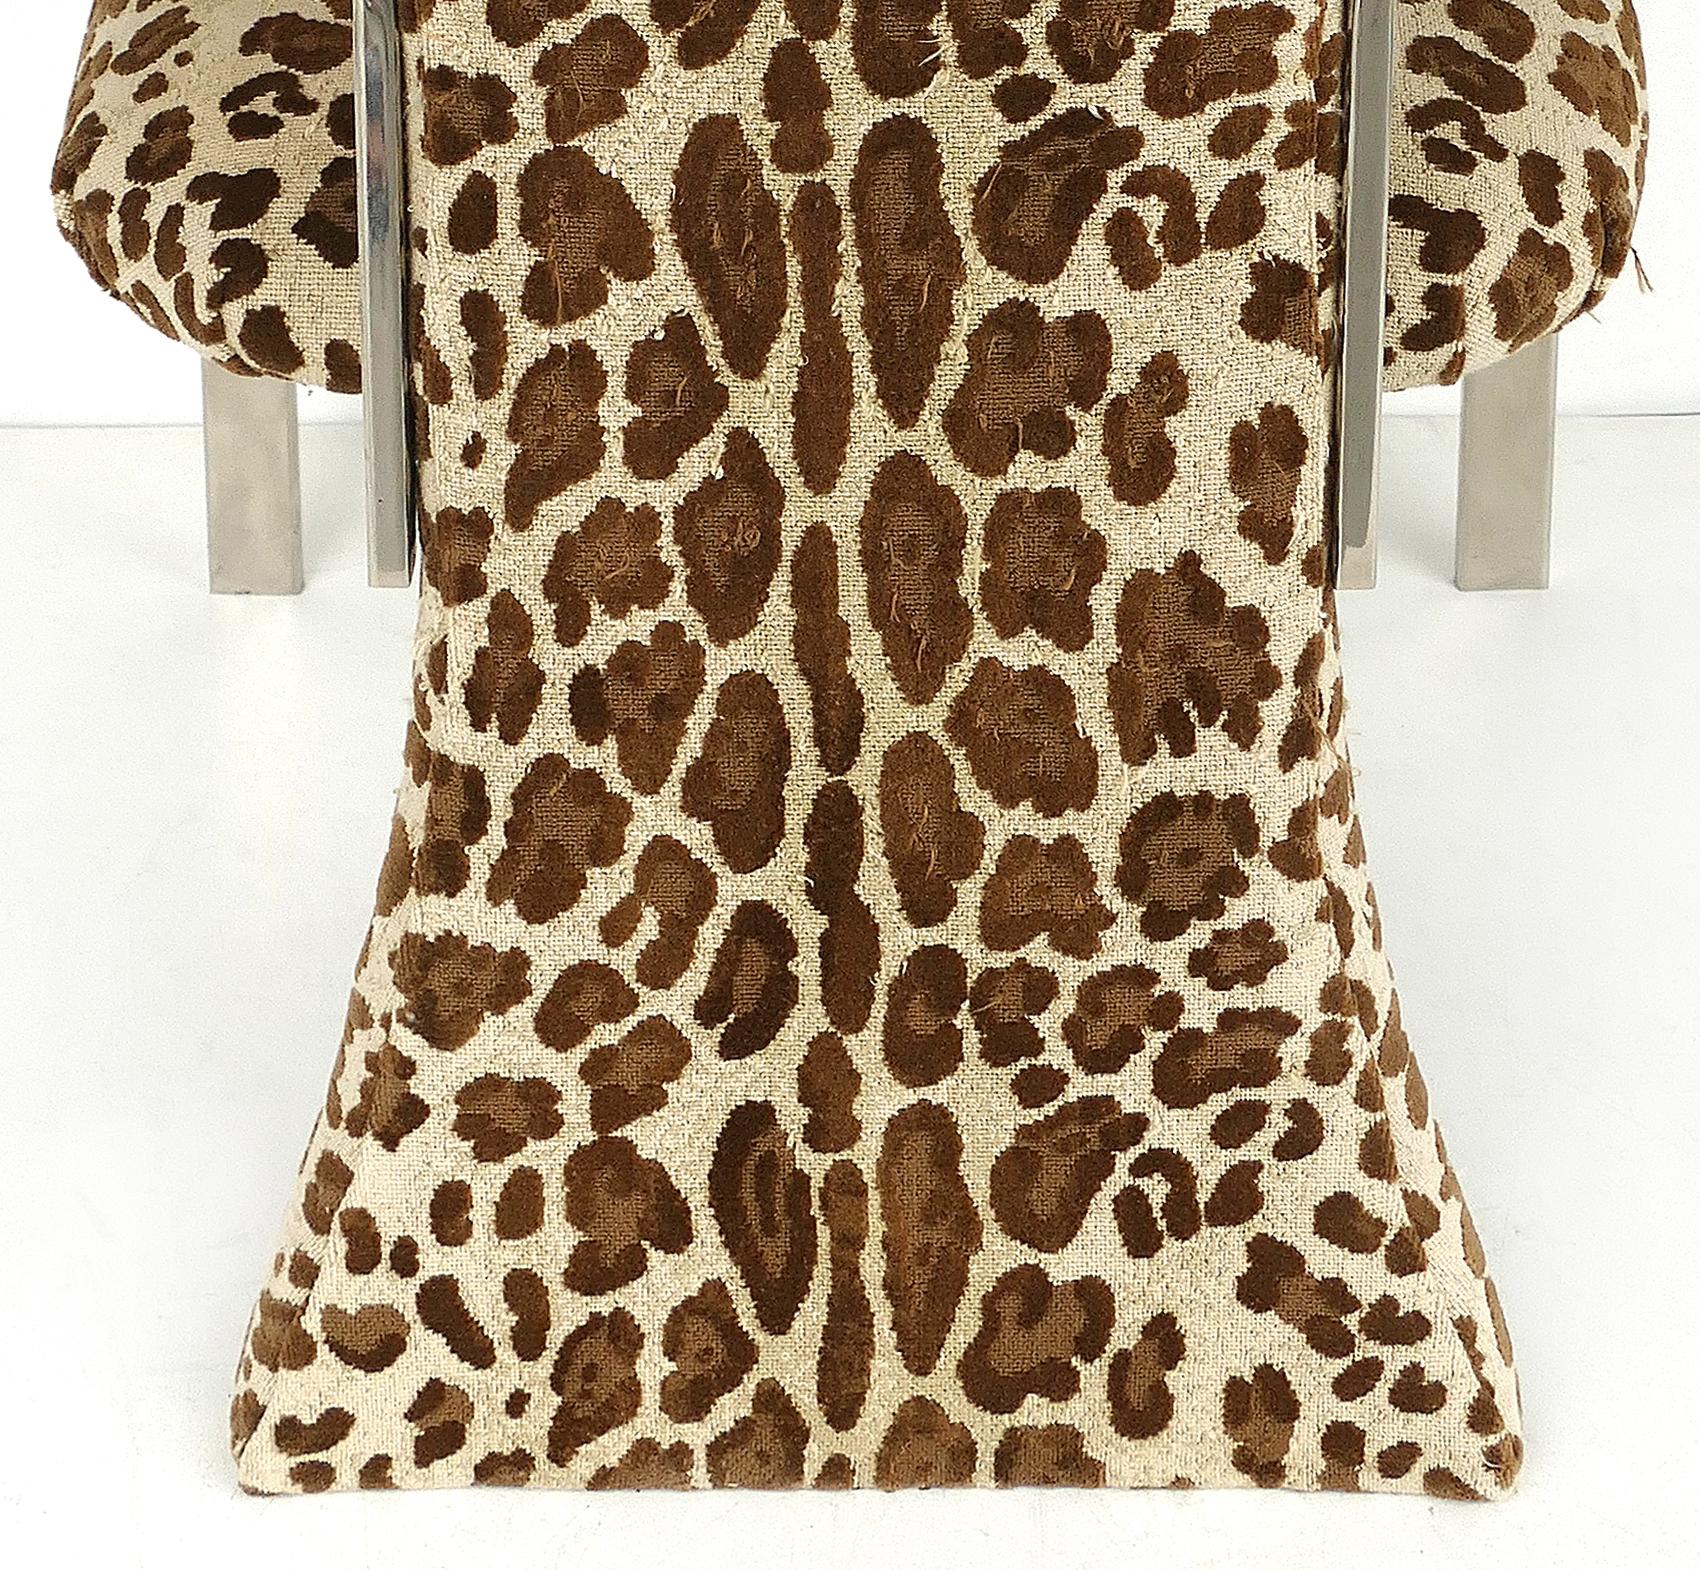 Stainless Steel Armchairs with Leopard Animal Print Upholstery 2